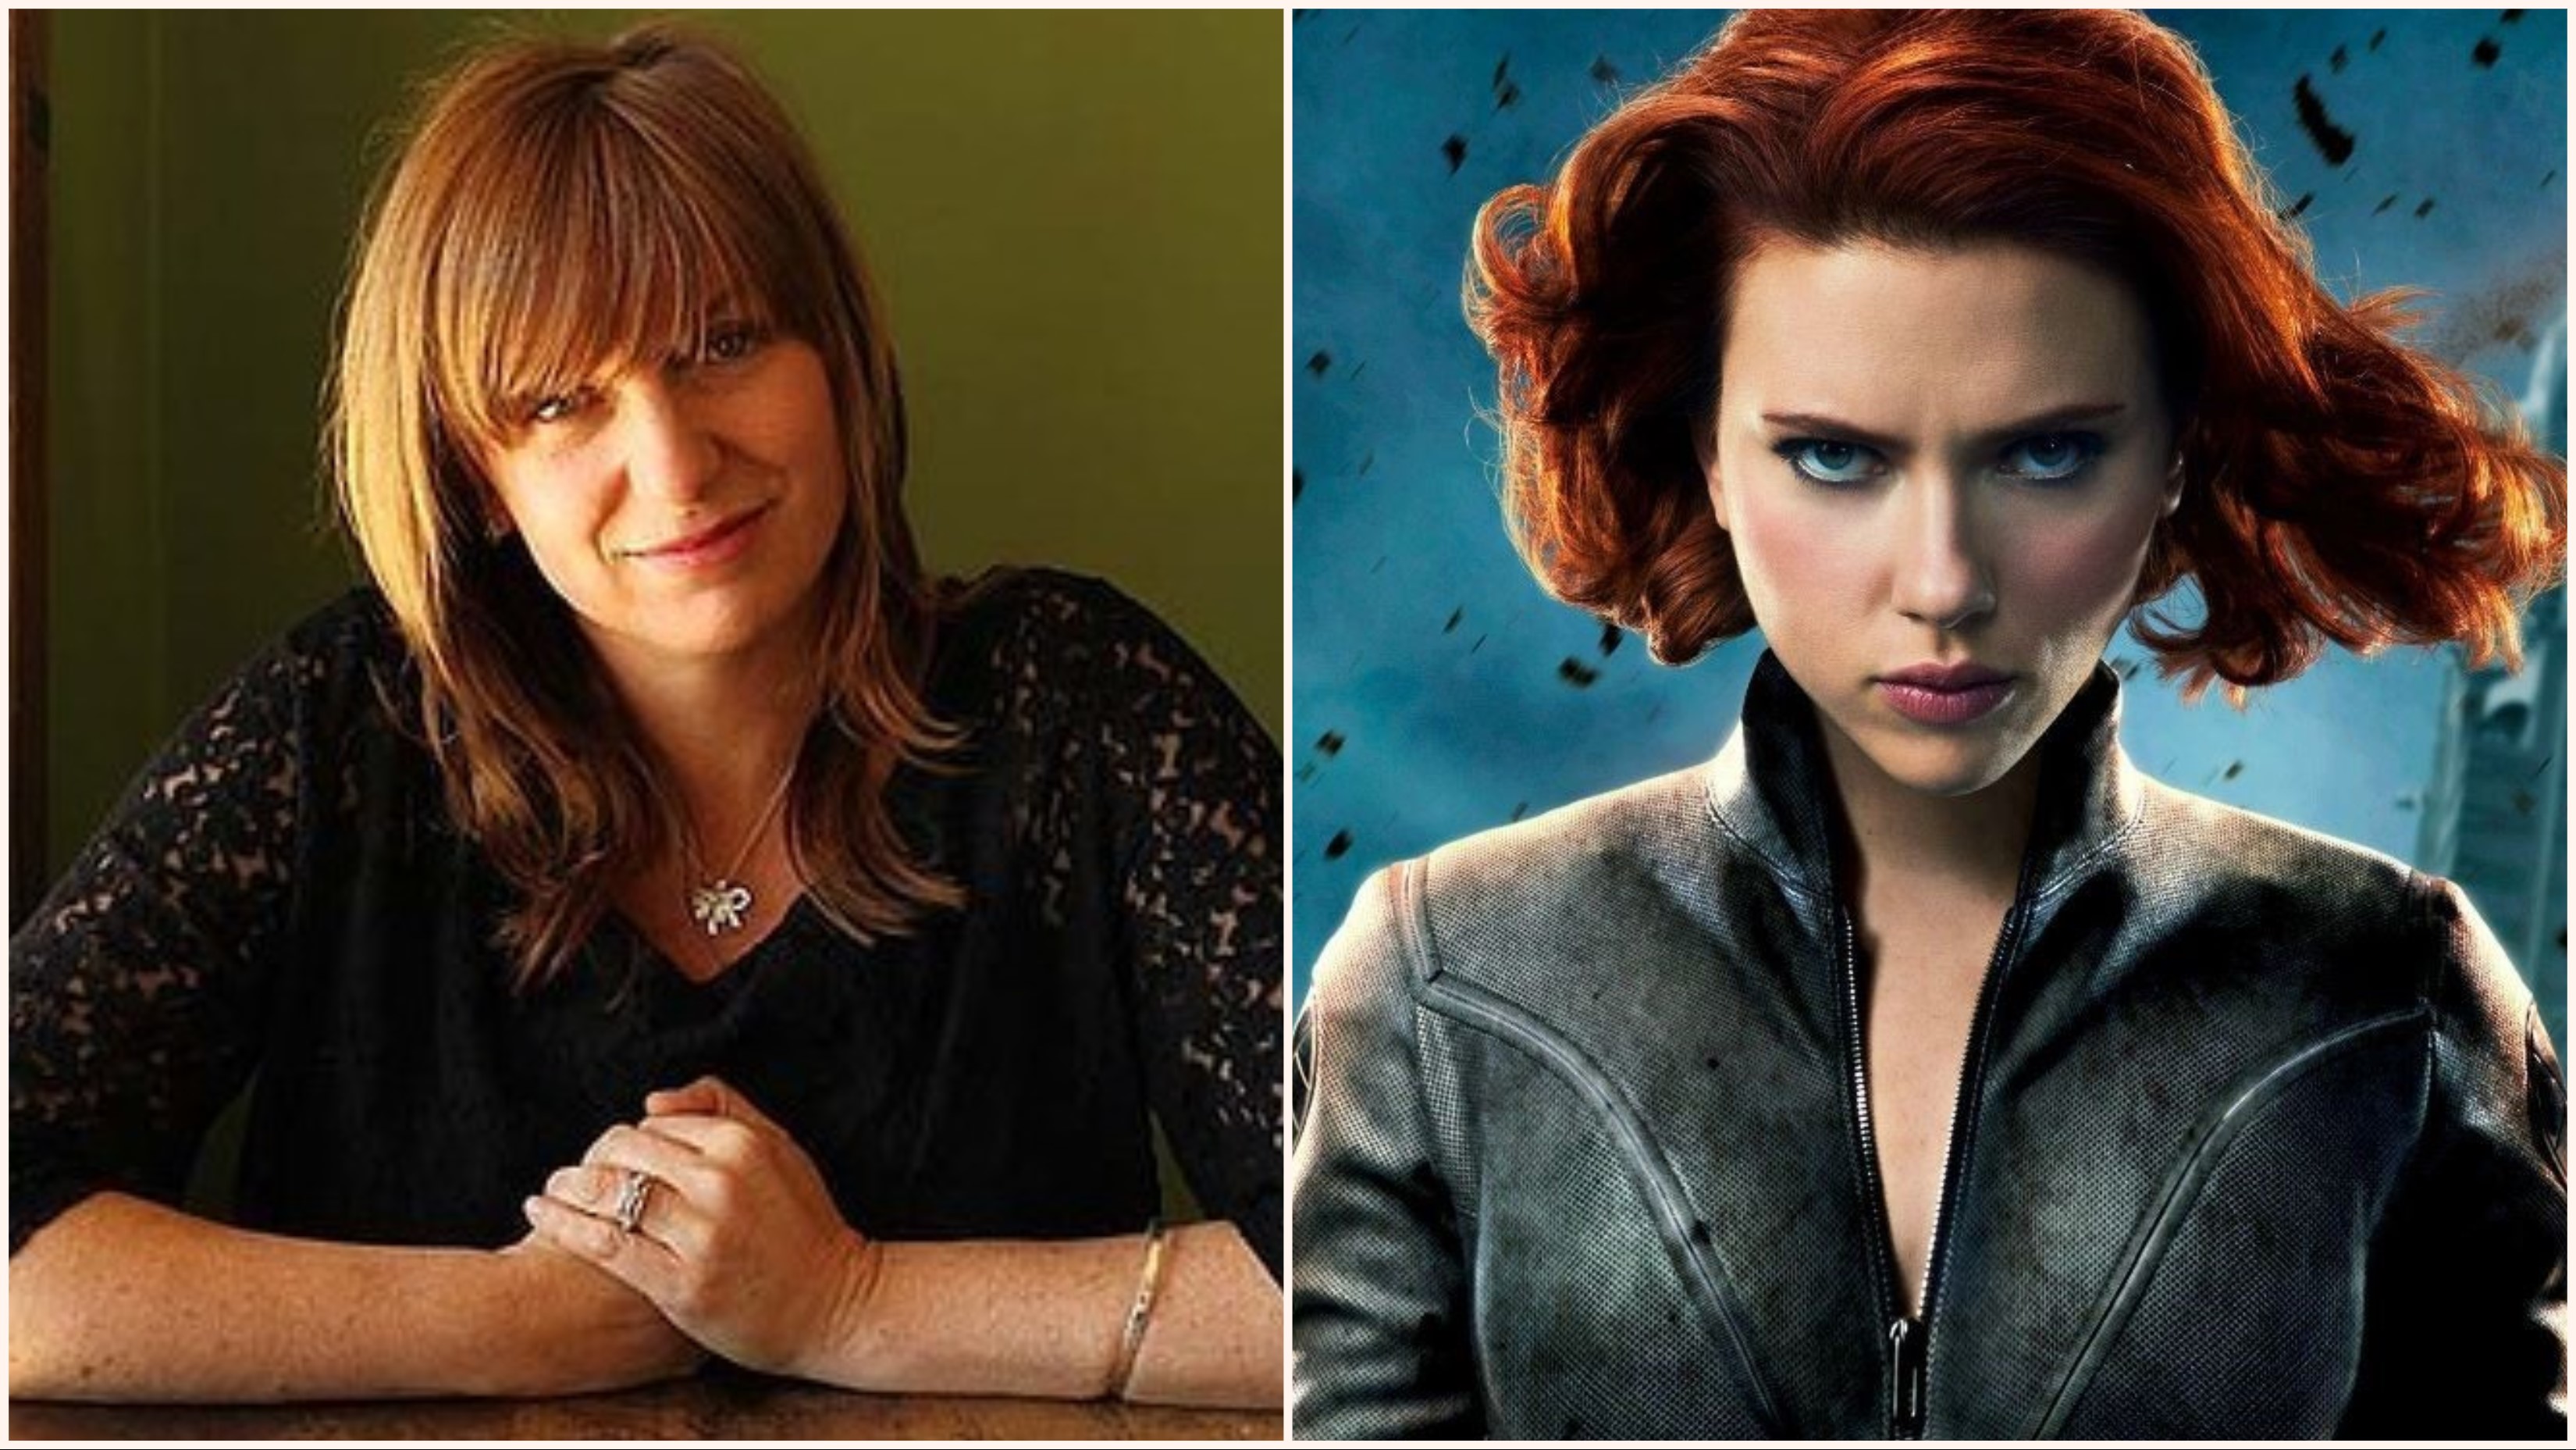 Marvel Studios has chosen Cate Shortland to direct the upcoming Black Widow film that is currently in development and apparently progressing quickly.